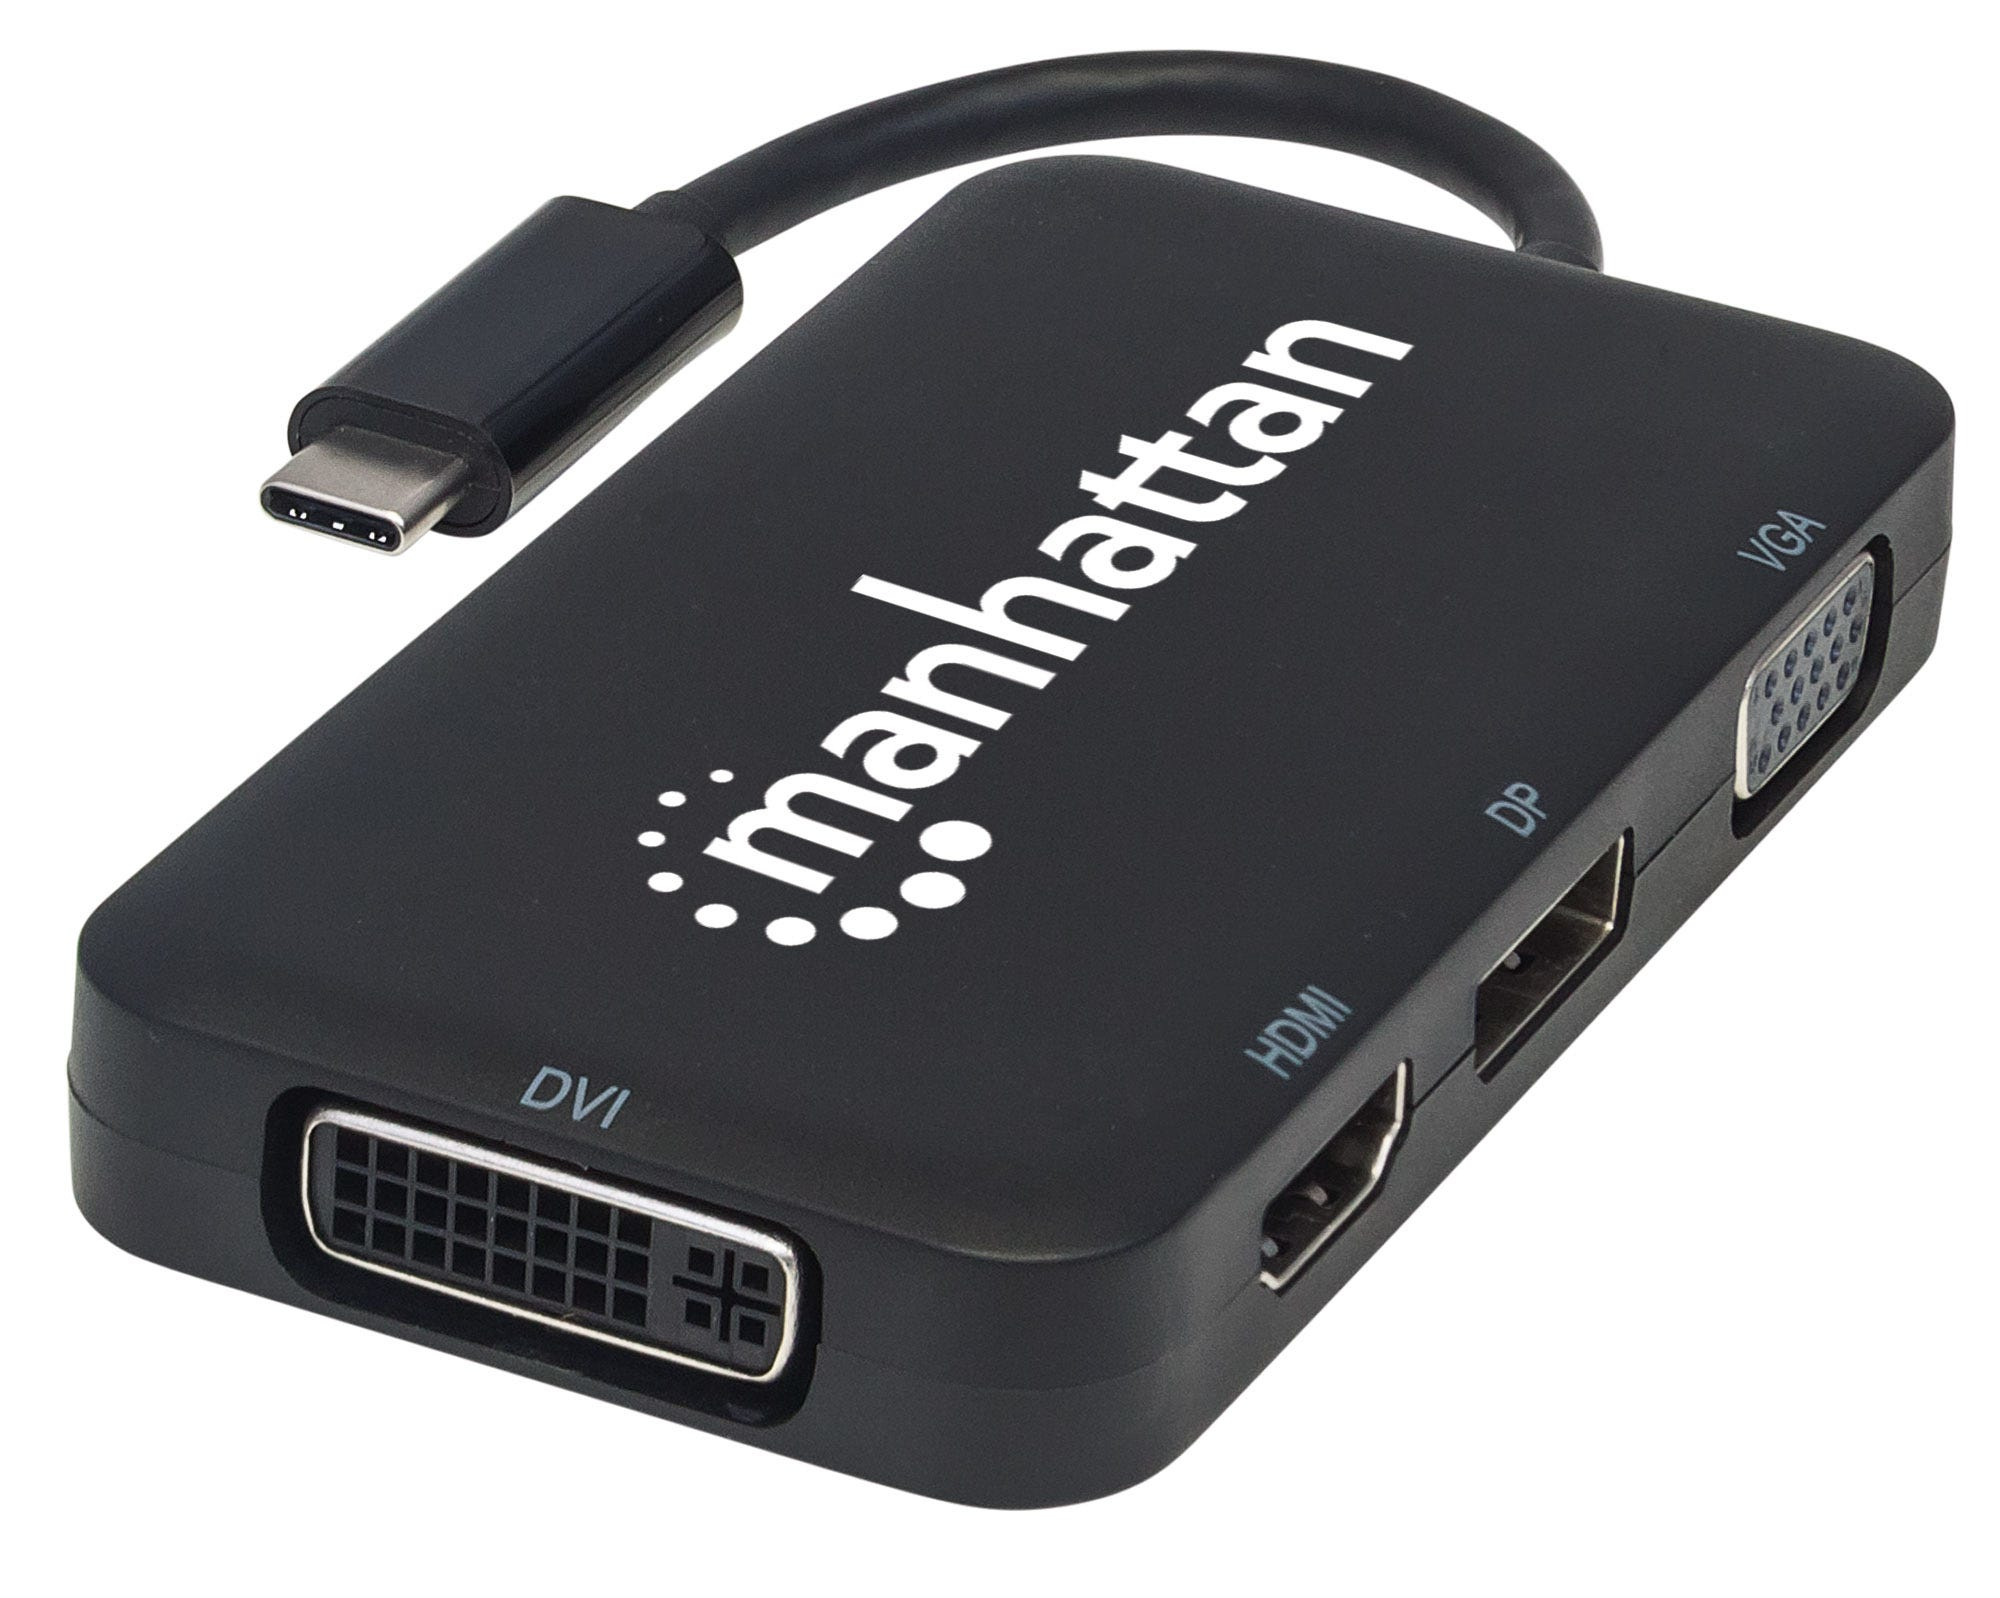 Manhattan USB-C Dock/Hub, Ports (x4): DisplayPort, DVI-I, HDMI or VGA, Note: Only One Port can be used at a time, External Power Supply Not Needed, Cable 8cm, Black, Three Year Warranty, Blister - Videoadapter - 24 pin USB-C männlich zu HD-15 (VGA)